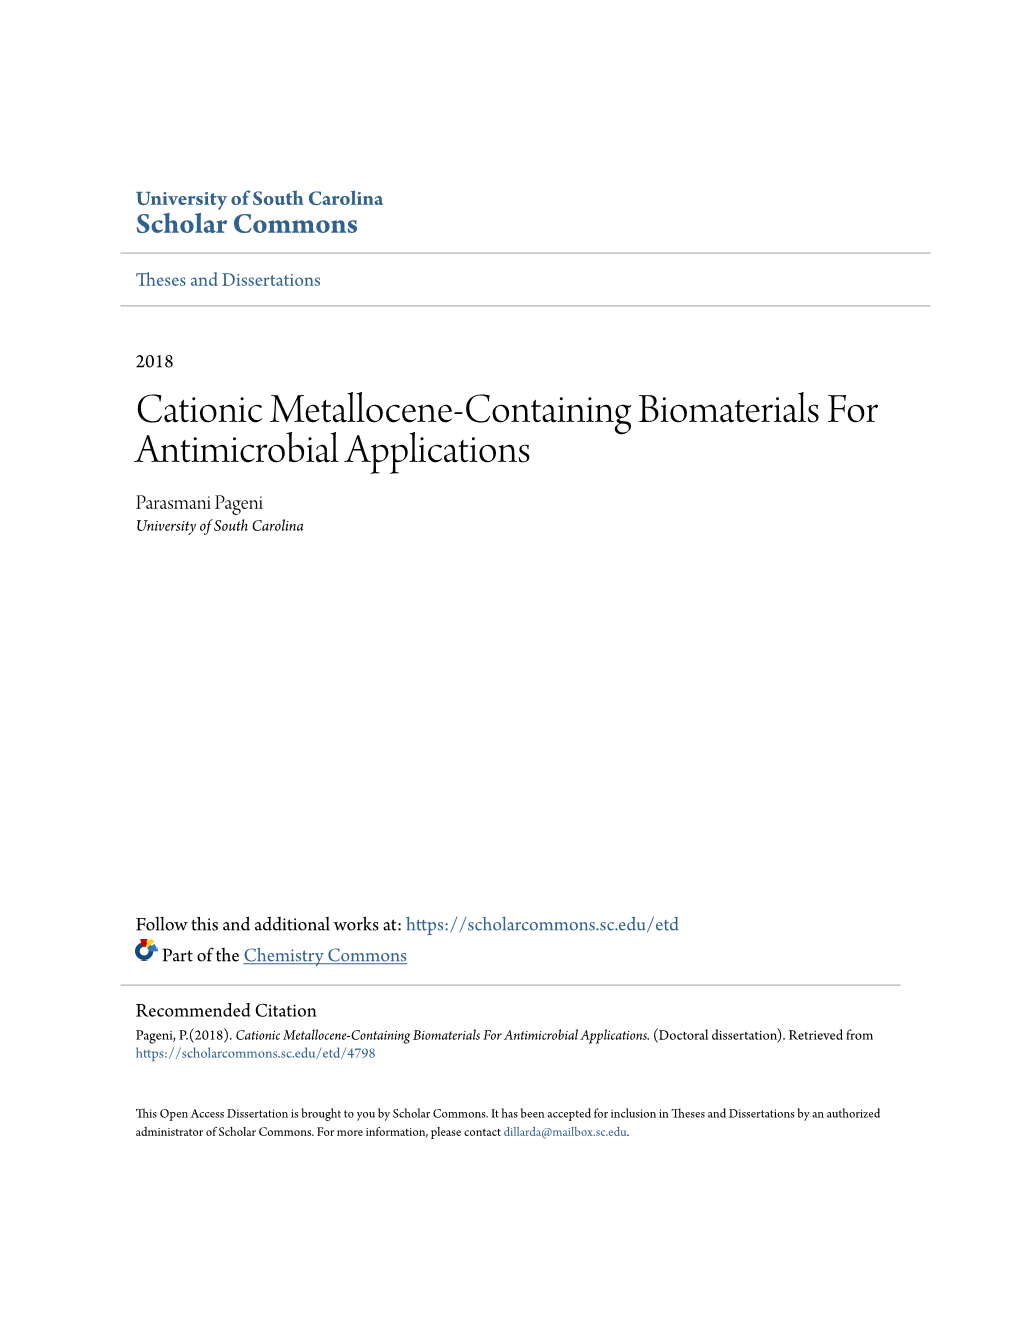 Cationic Metallocene-Containing Biomaterials for Antimicrobial Applications Parasmani Pageni University of South Carolina